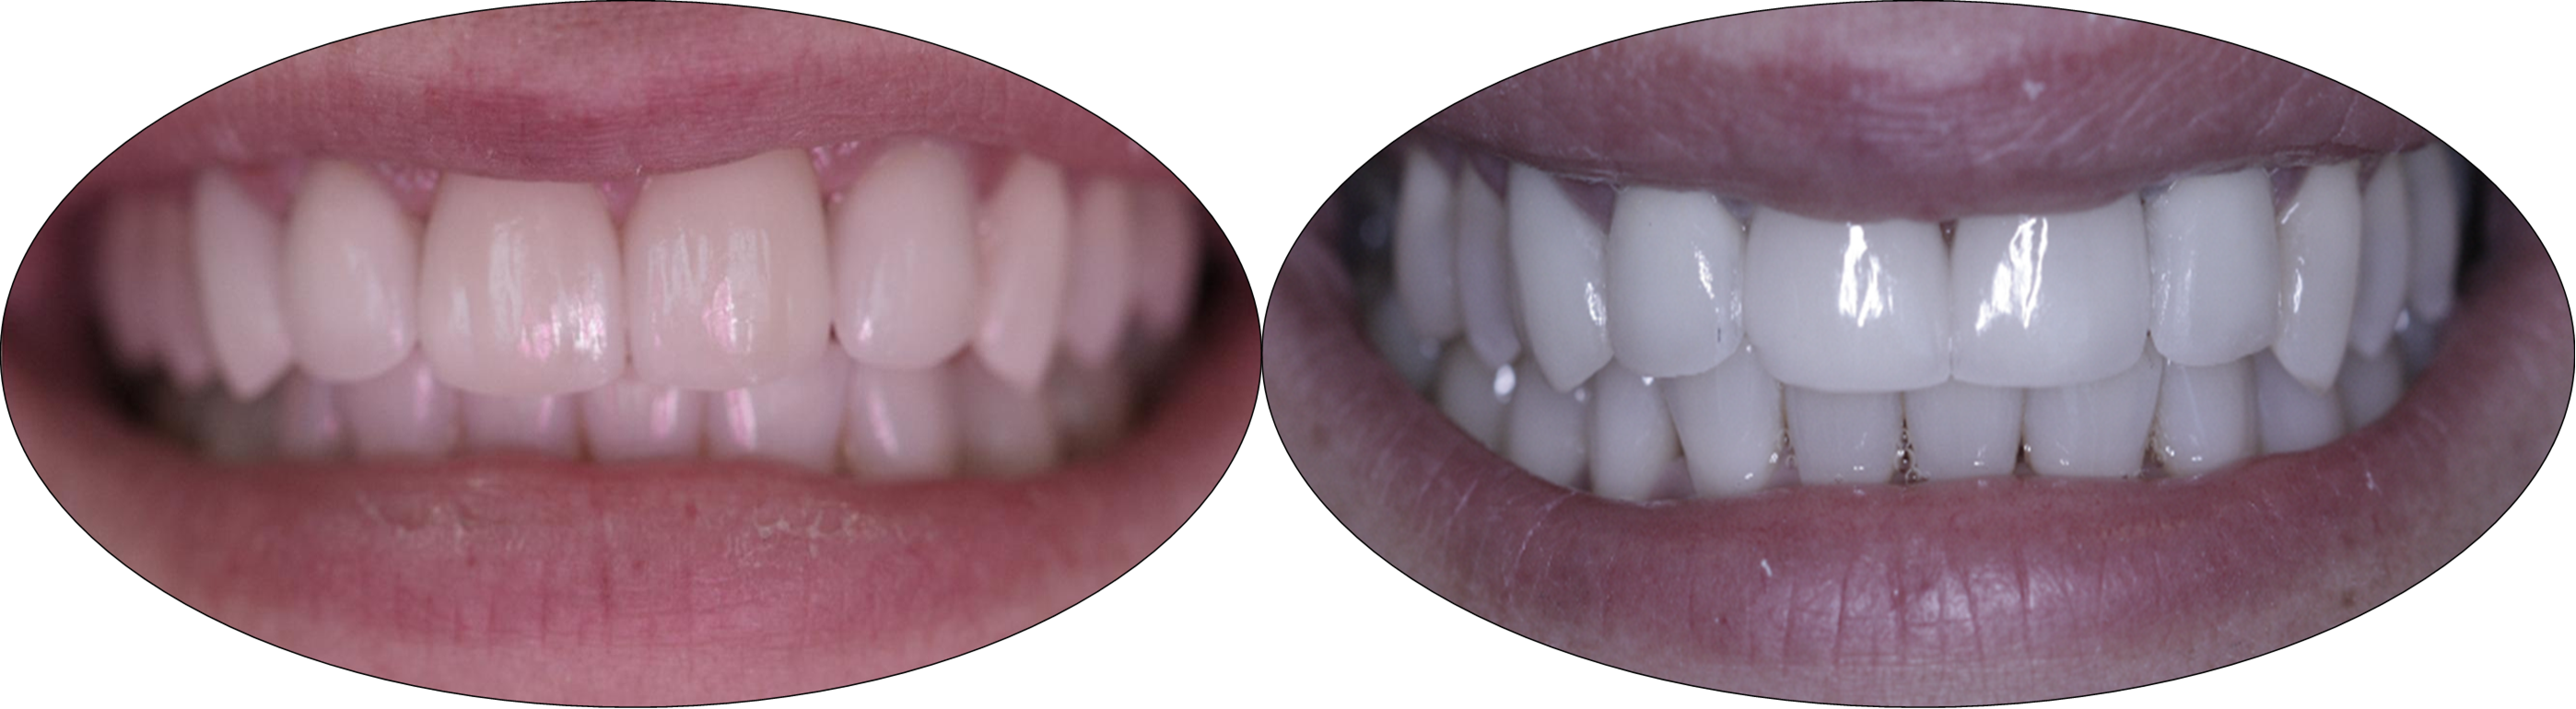 Before and after pictures of patient with porcelain veneers and crowns